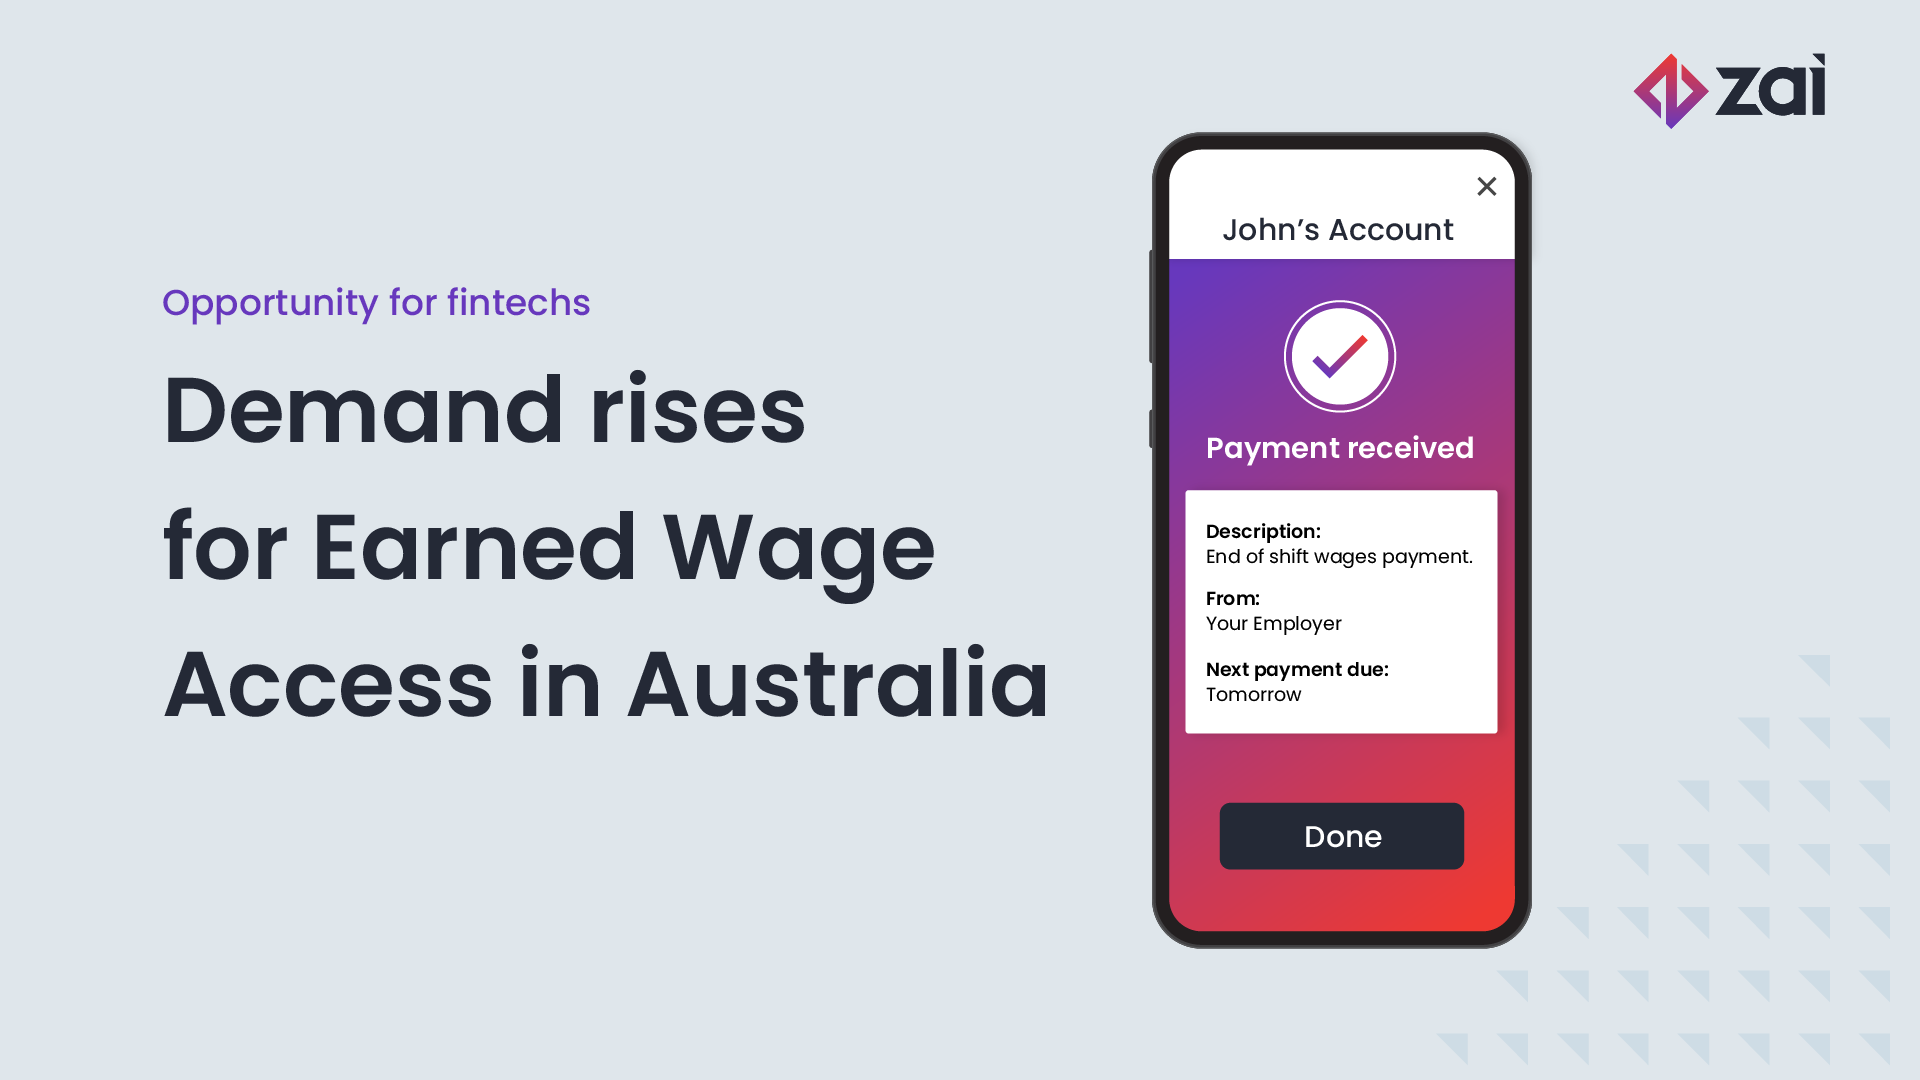 Demand rises for Earned Wage Access in Australia